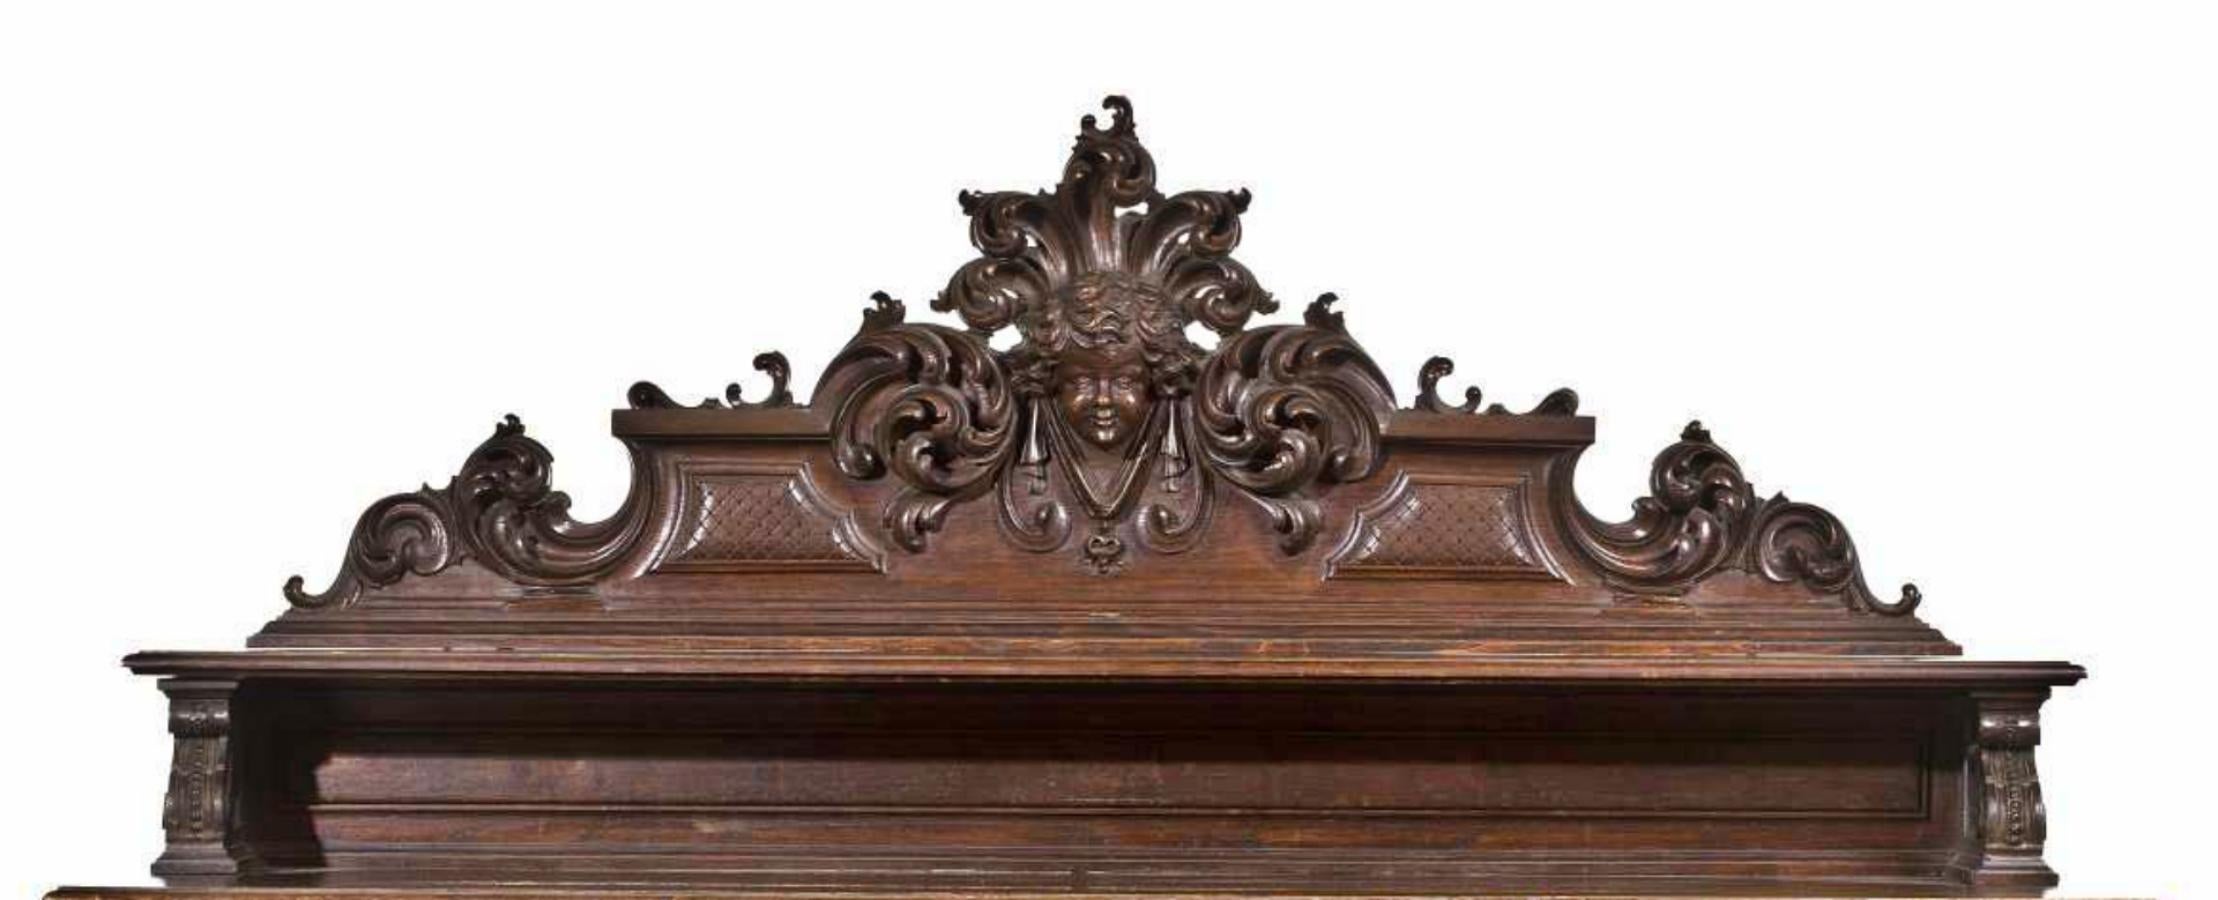 Sideboard
Renaissance style
end 19th century
in carved brown.
An elevation cutout of a shelf, topped by a cherub.
Lower body with three doors decorated with plant elements and cherubs.
Failures.
Dimensions: 161 x 173 x 66 cm.